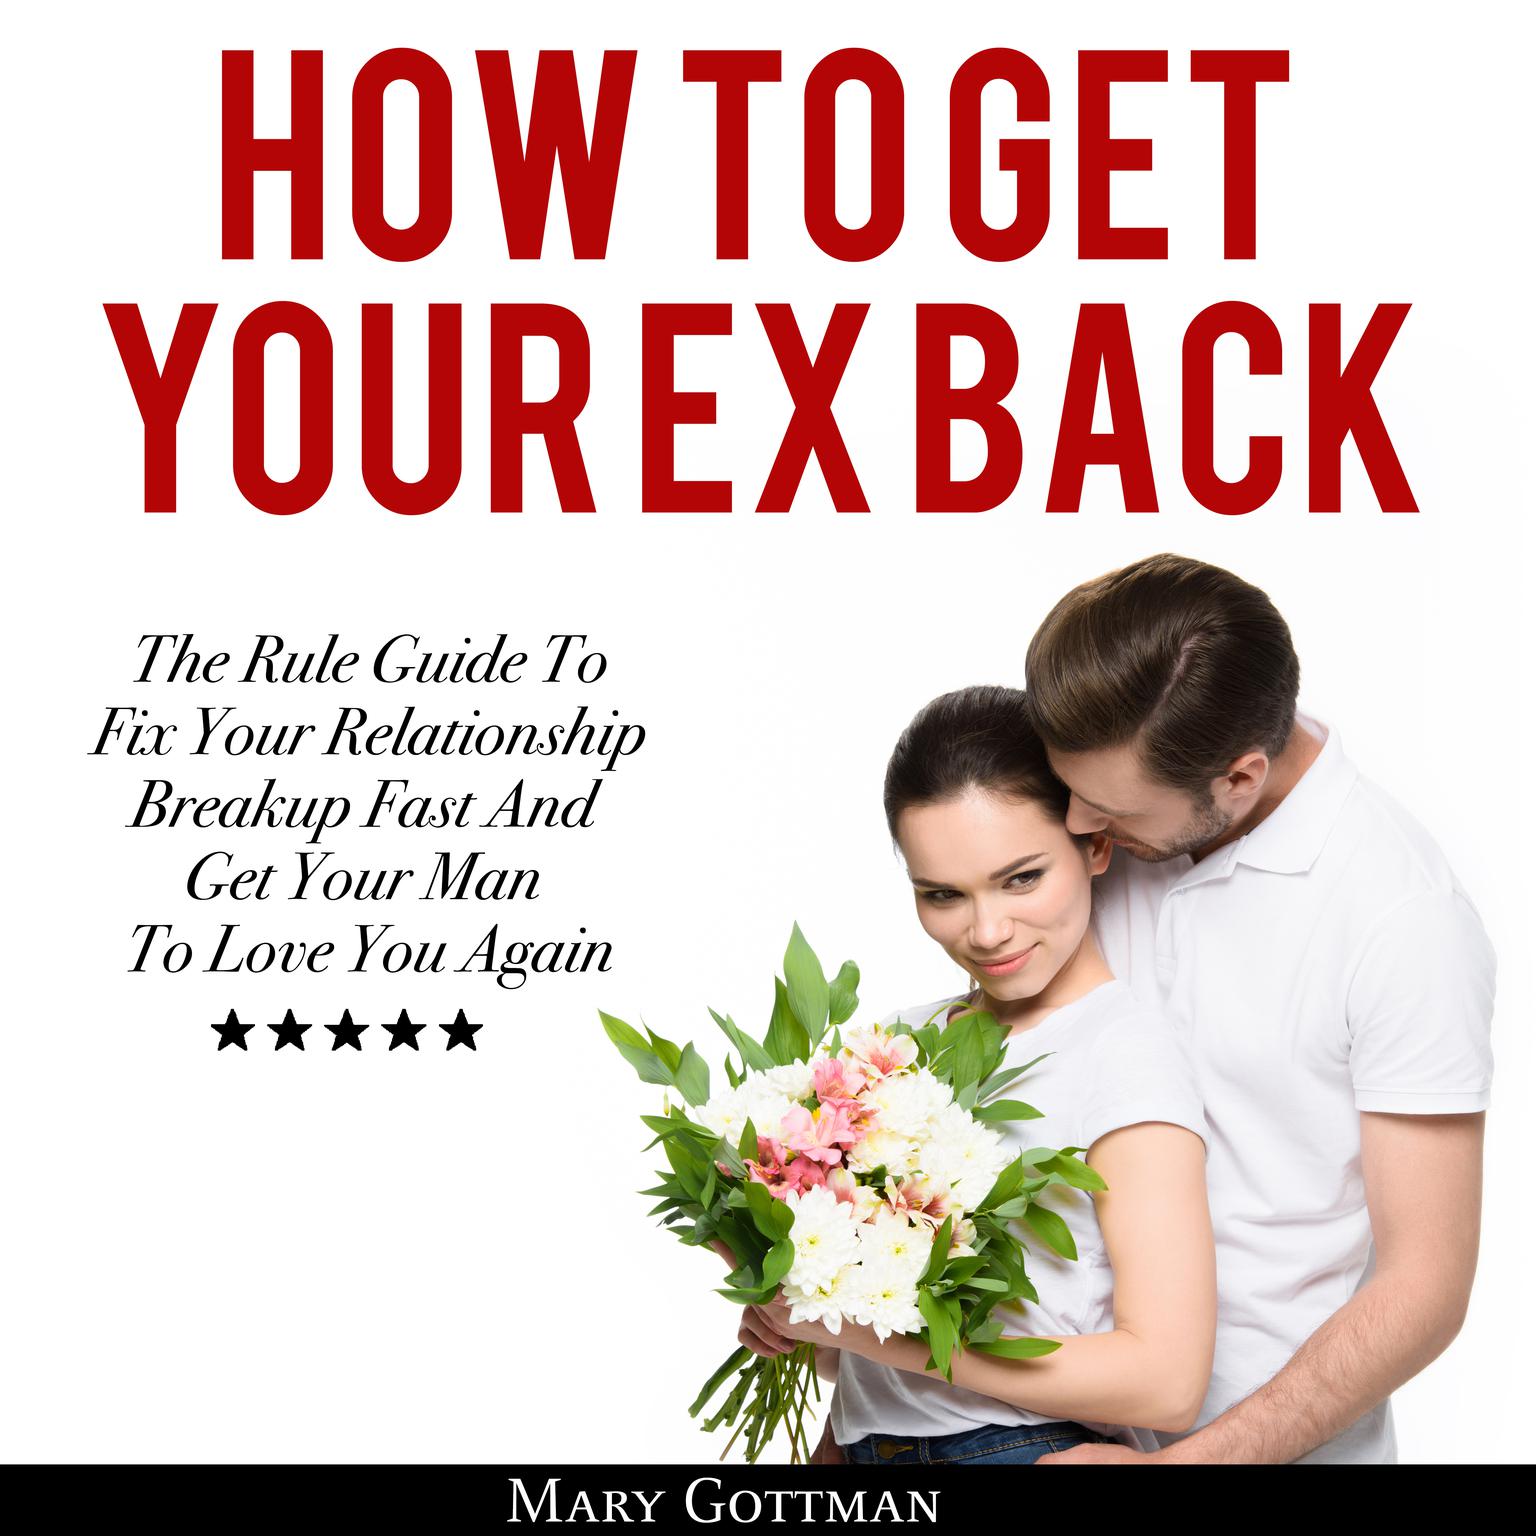 How To Get Your Ex Back: The Rule Guide to Fix Your Relationship Breakup Fast and Get Your Man to Love You Again Audiobook, by Mary Gottman